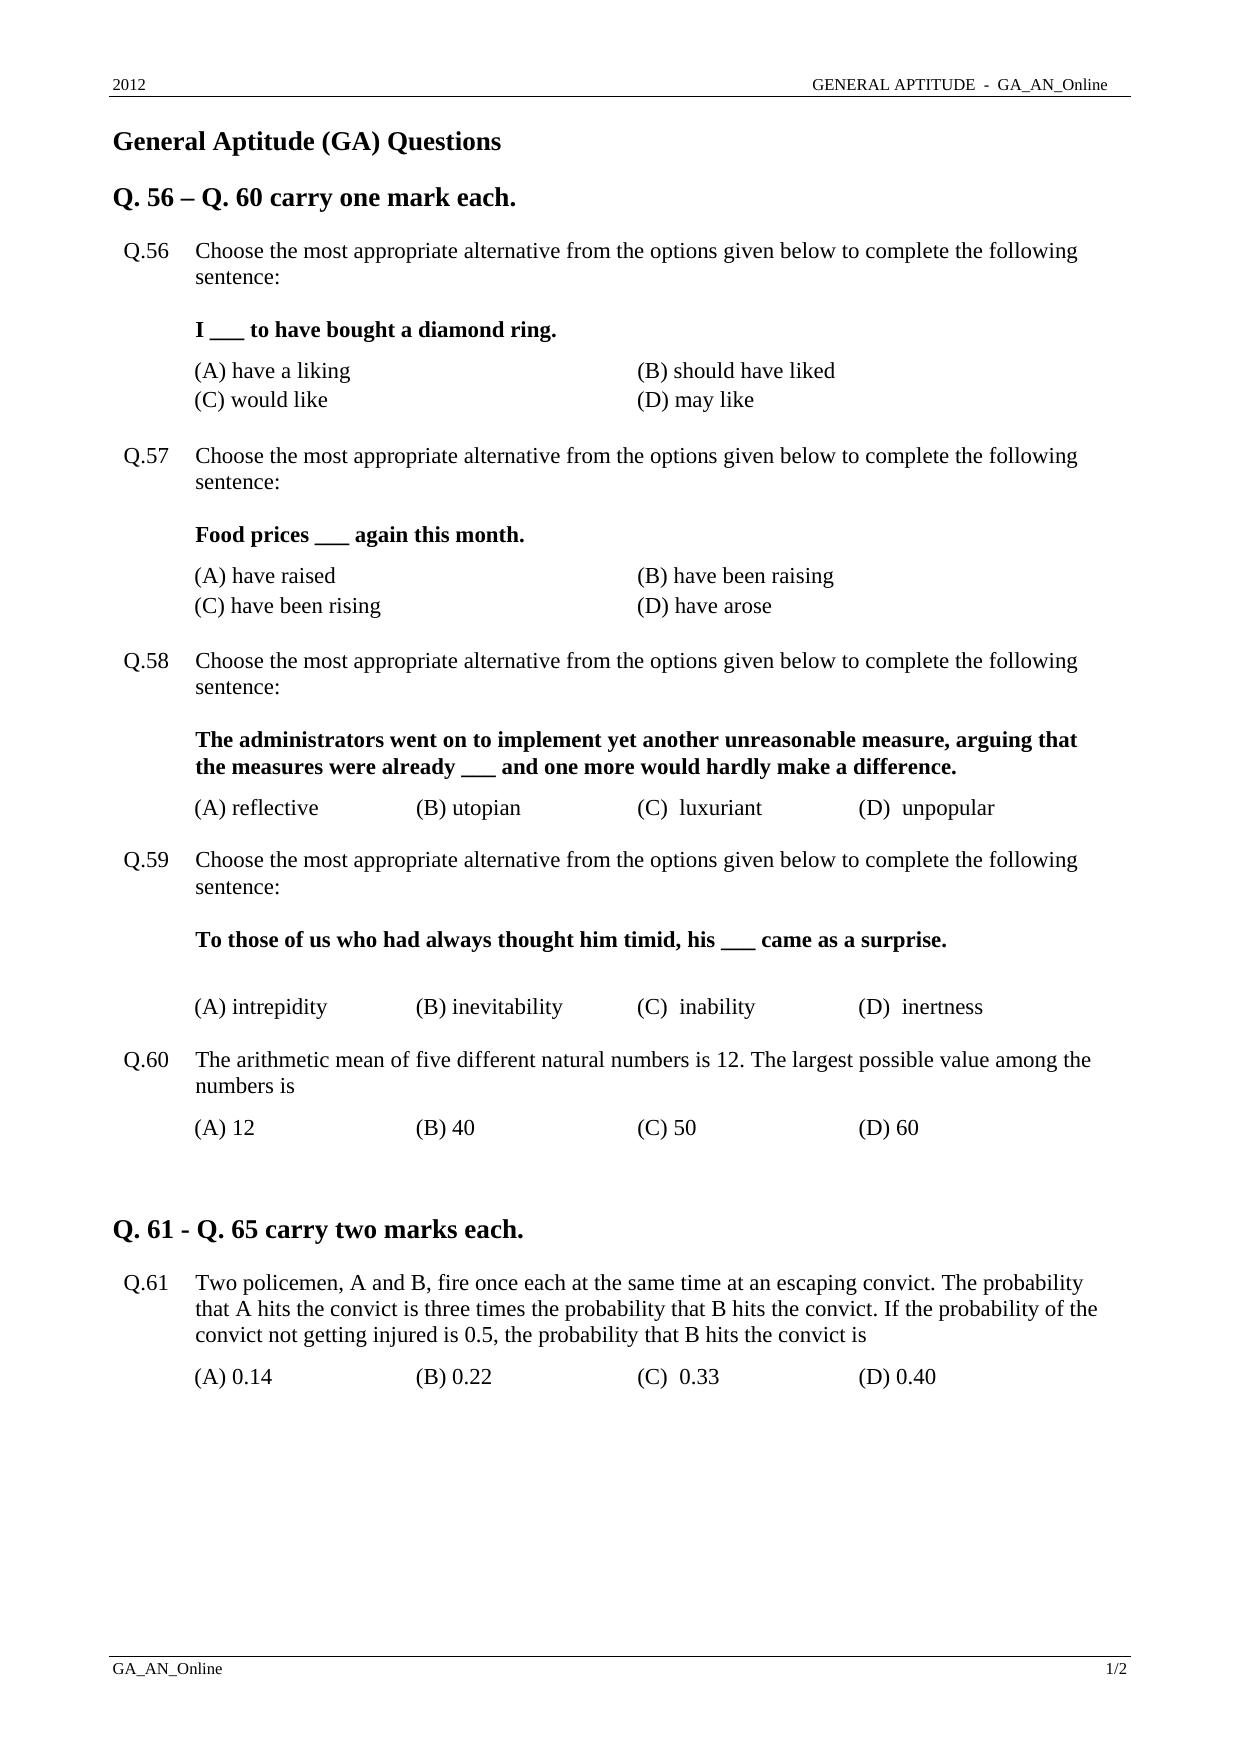 GATE 2012 Mining Engineering (MN) Question Paper with Answer Key - Page 11